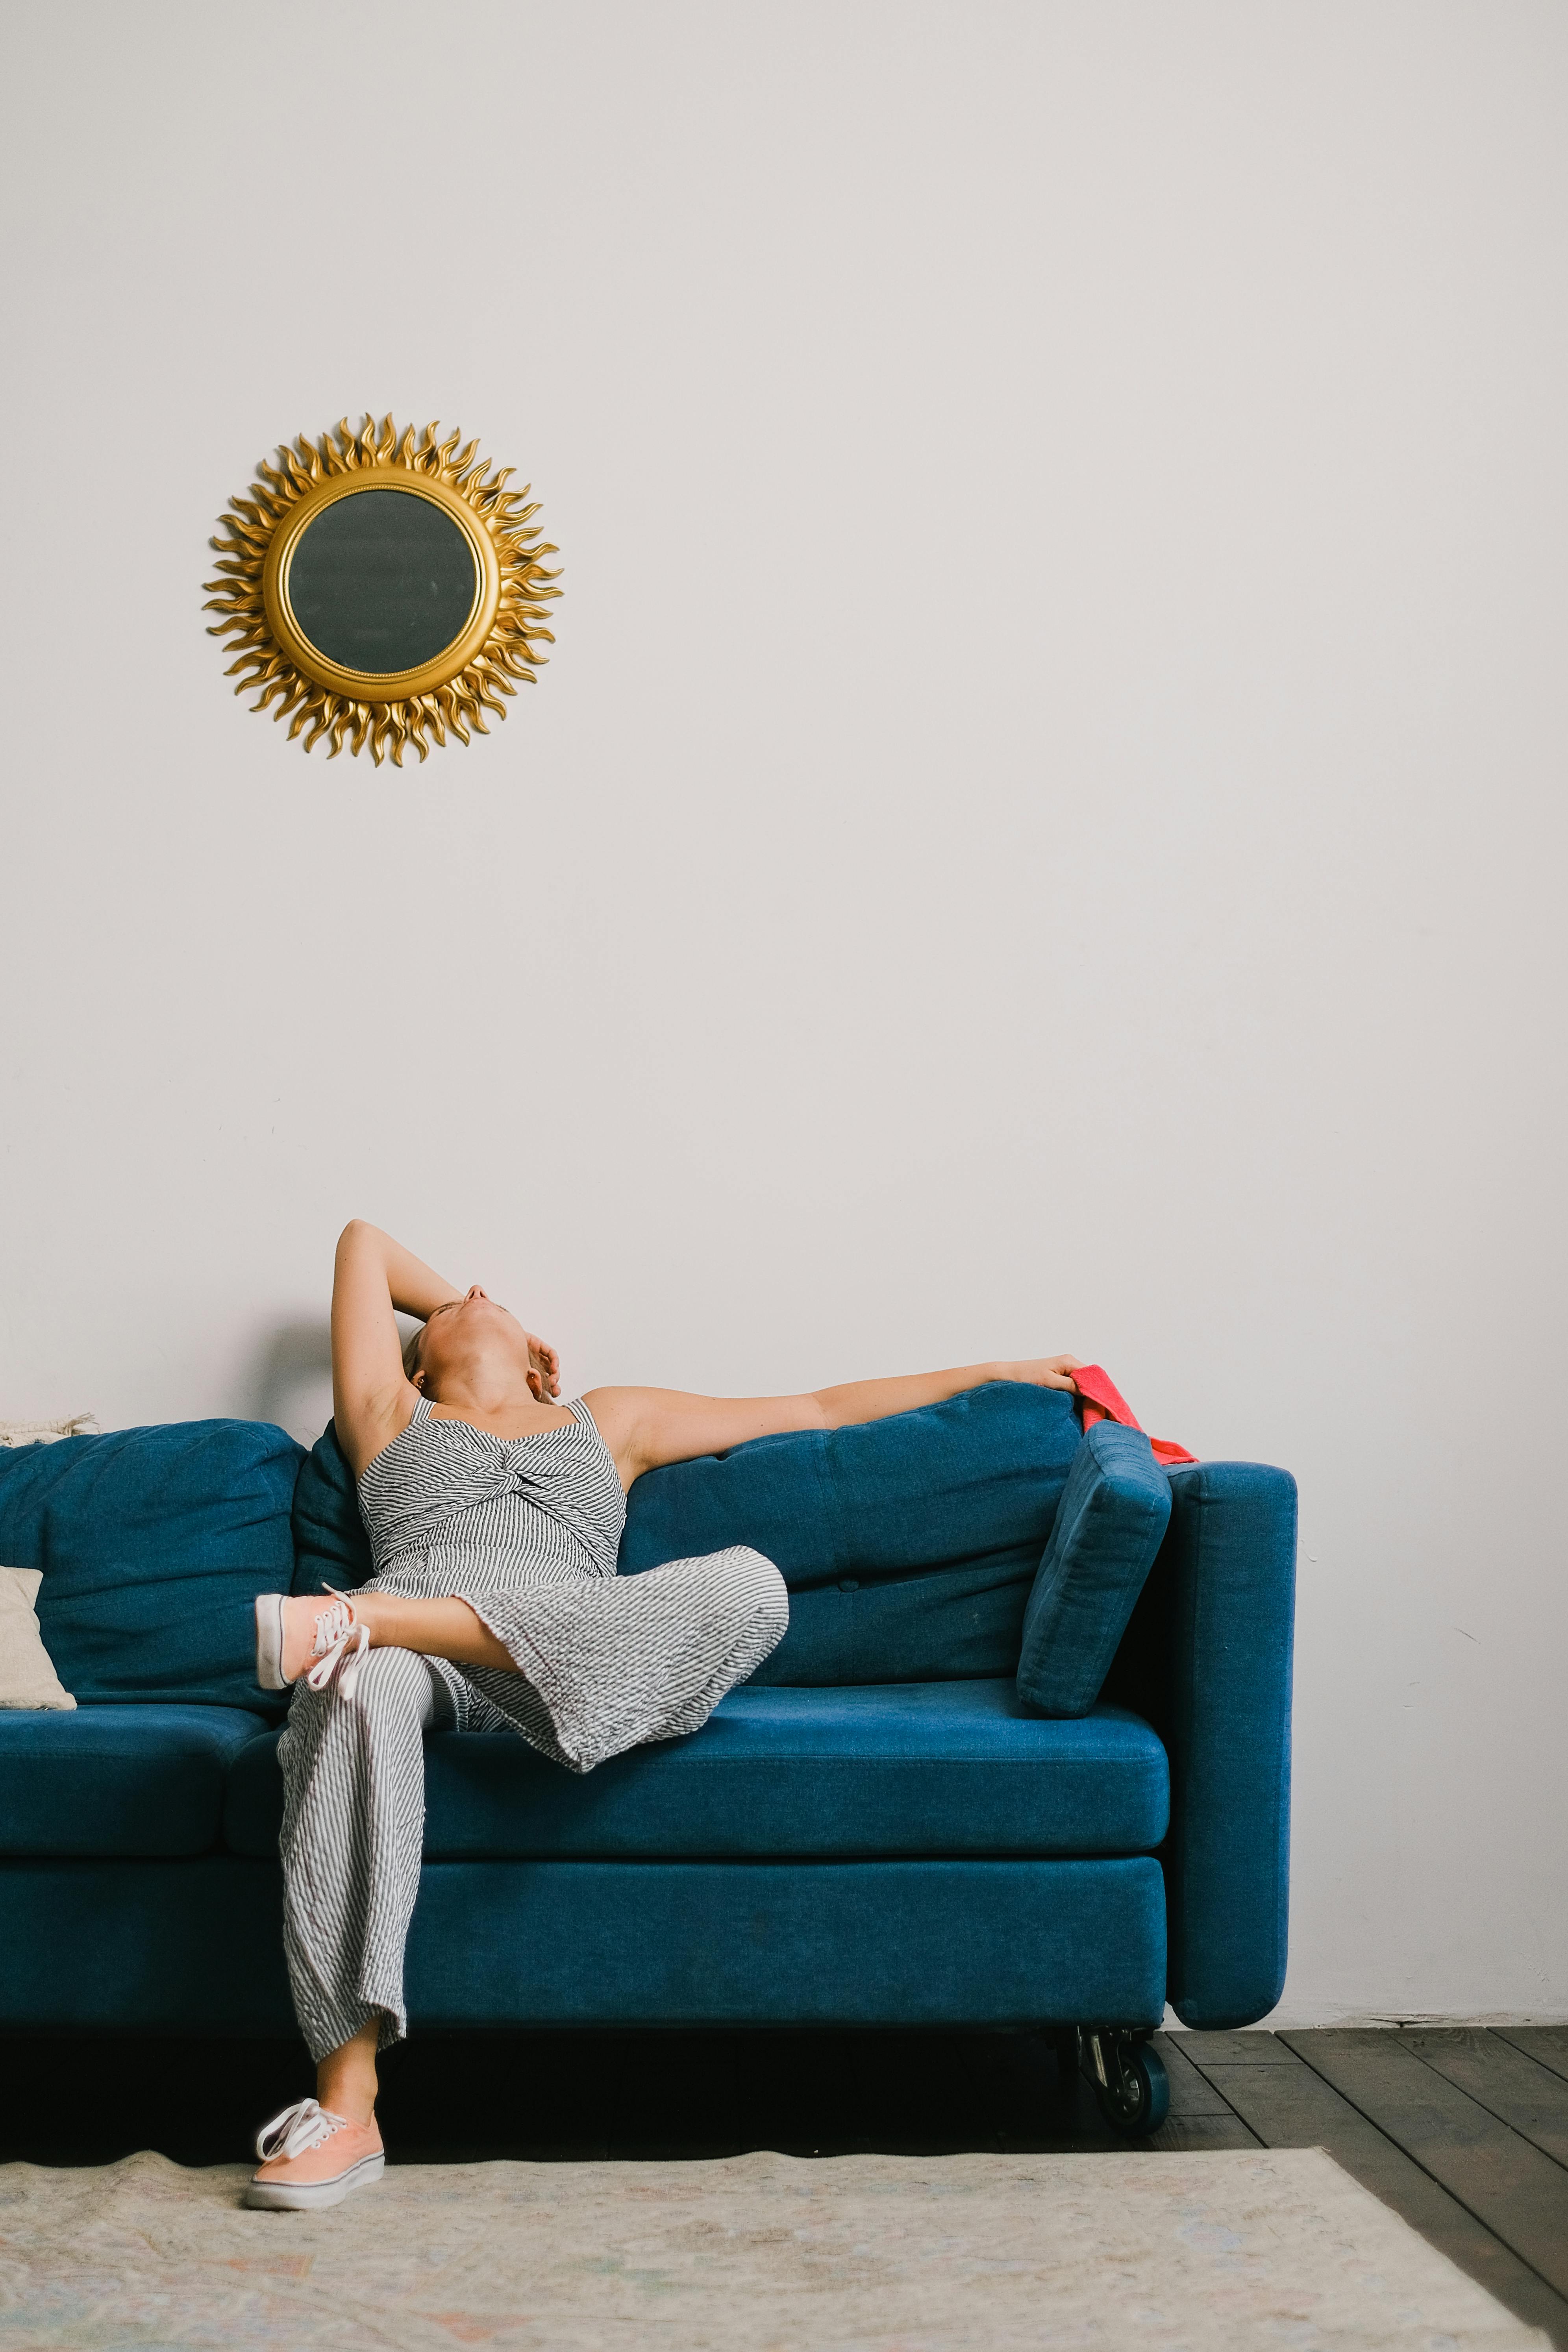 Exhausted woman on the couch | Source: Pexels